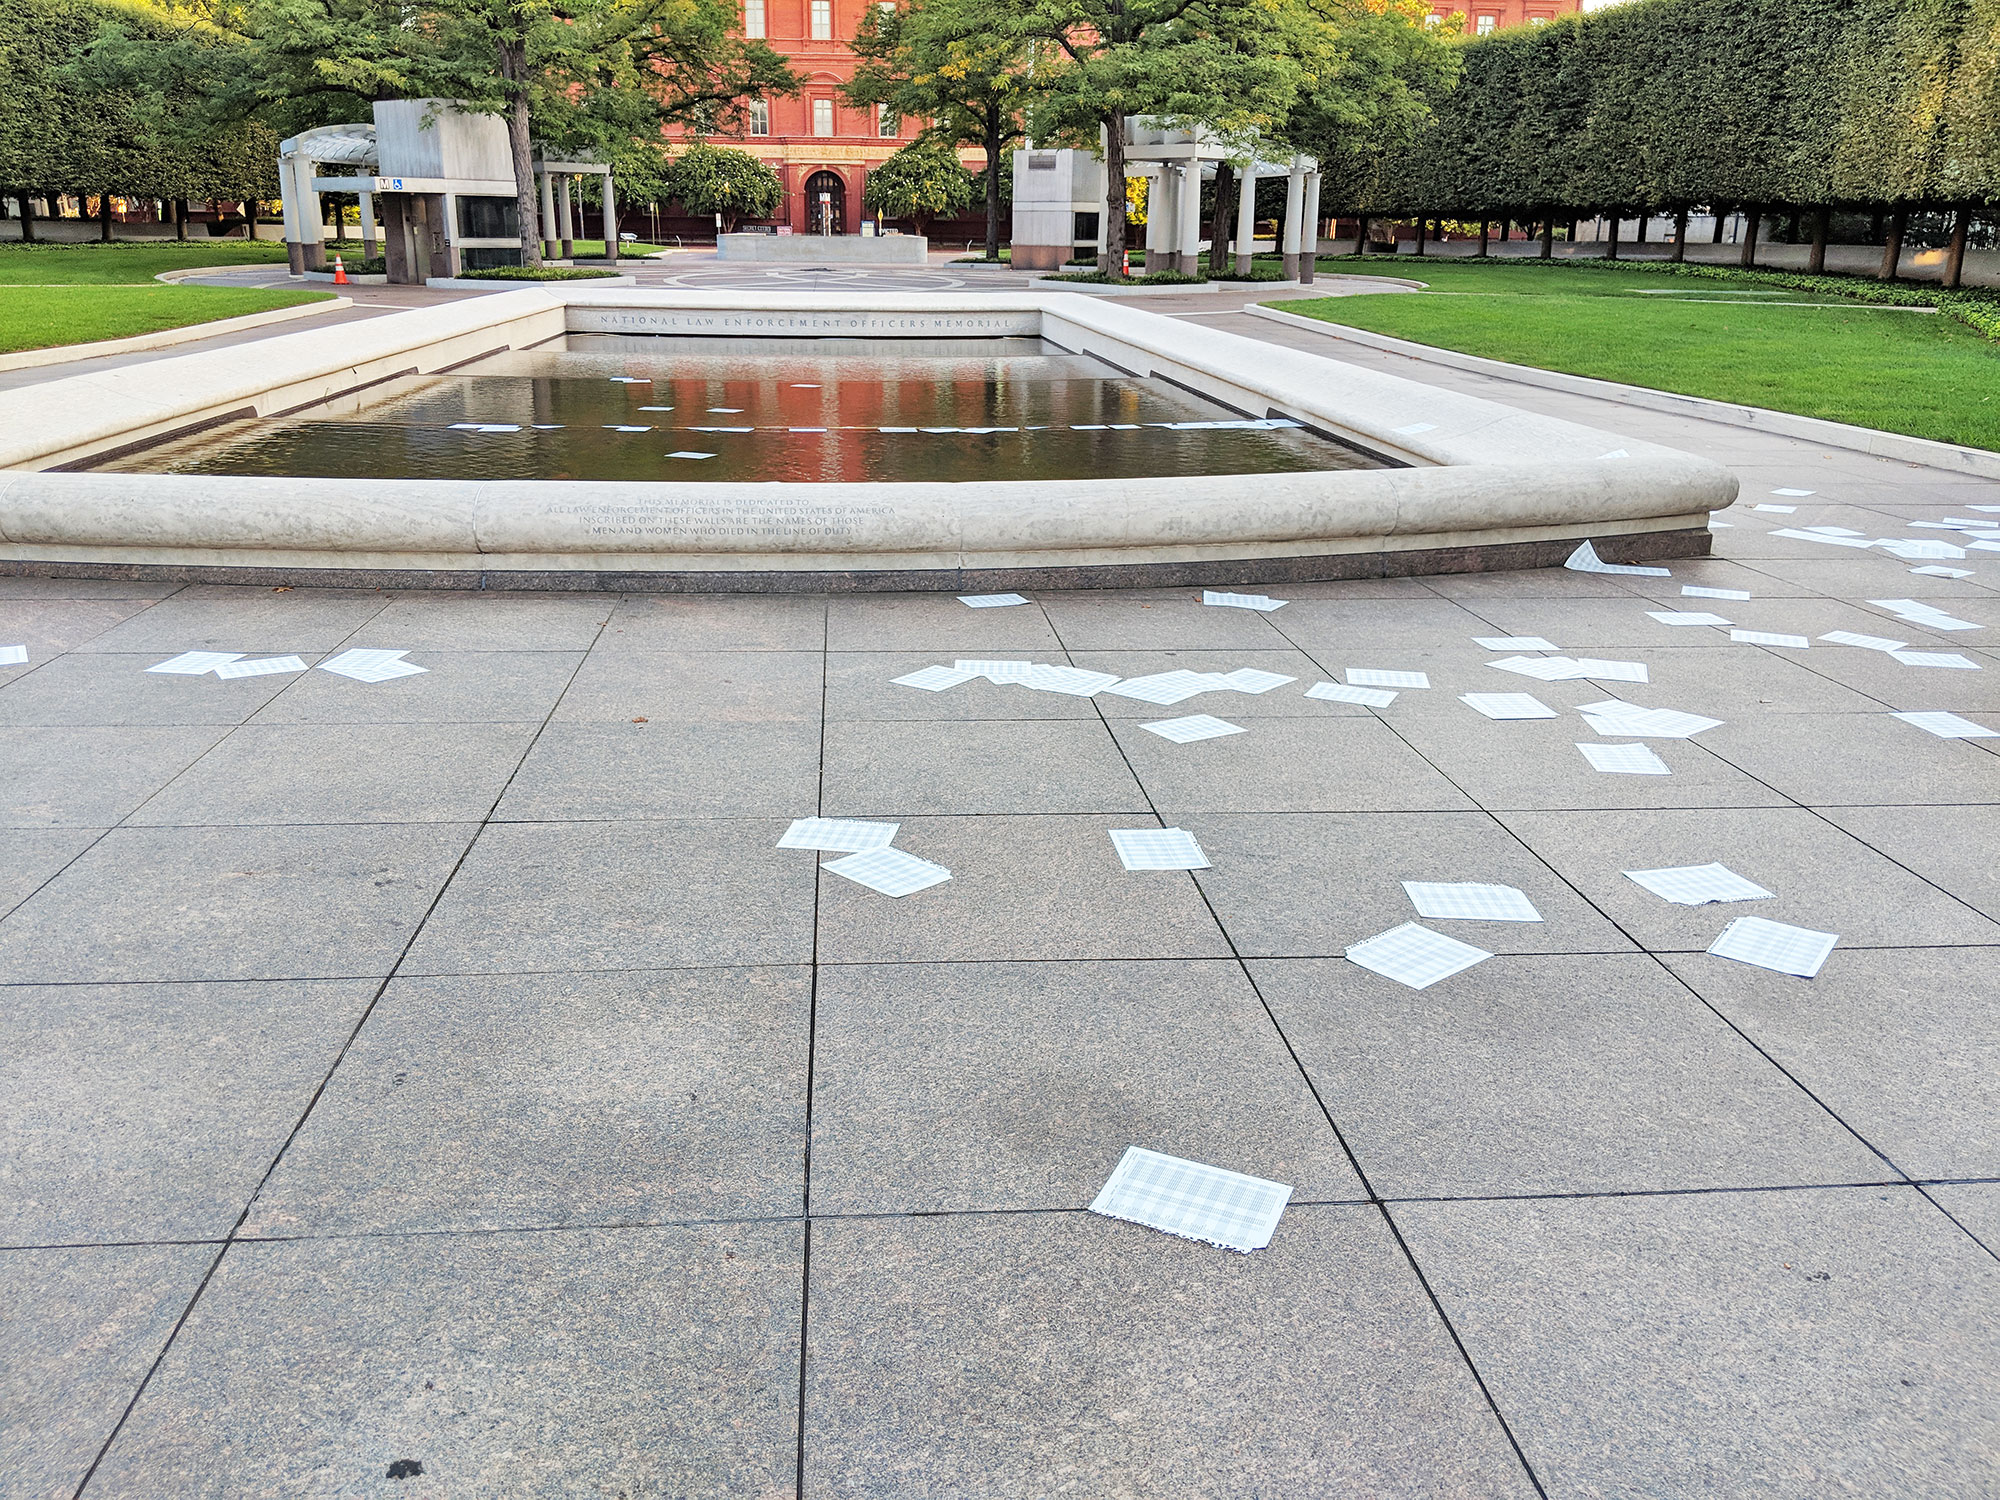 Some petty vandalism at the National Police Officers Memorial.